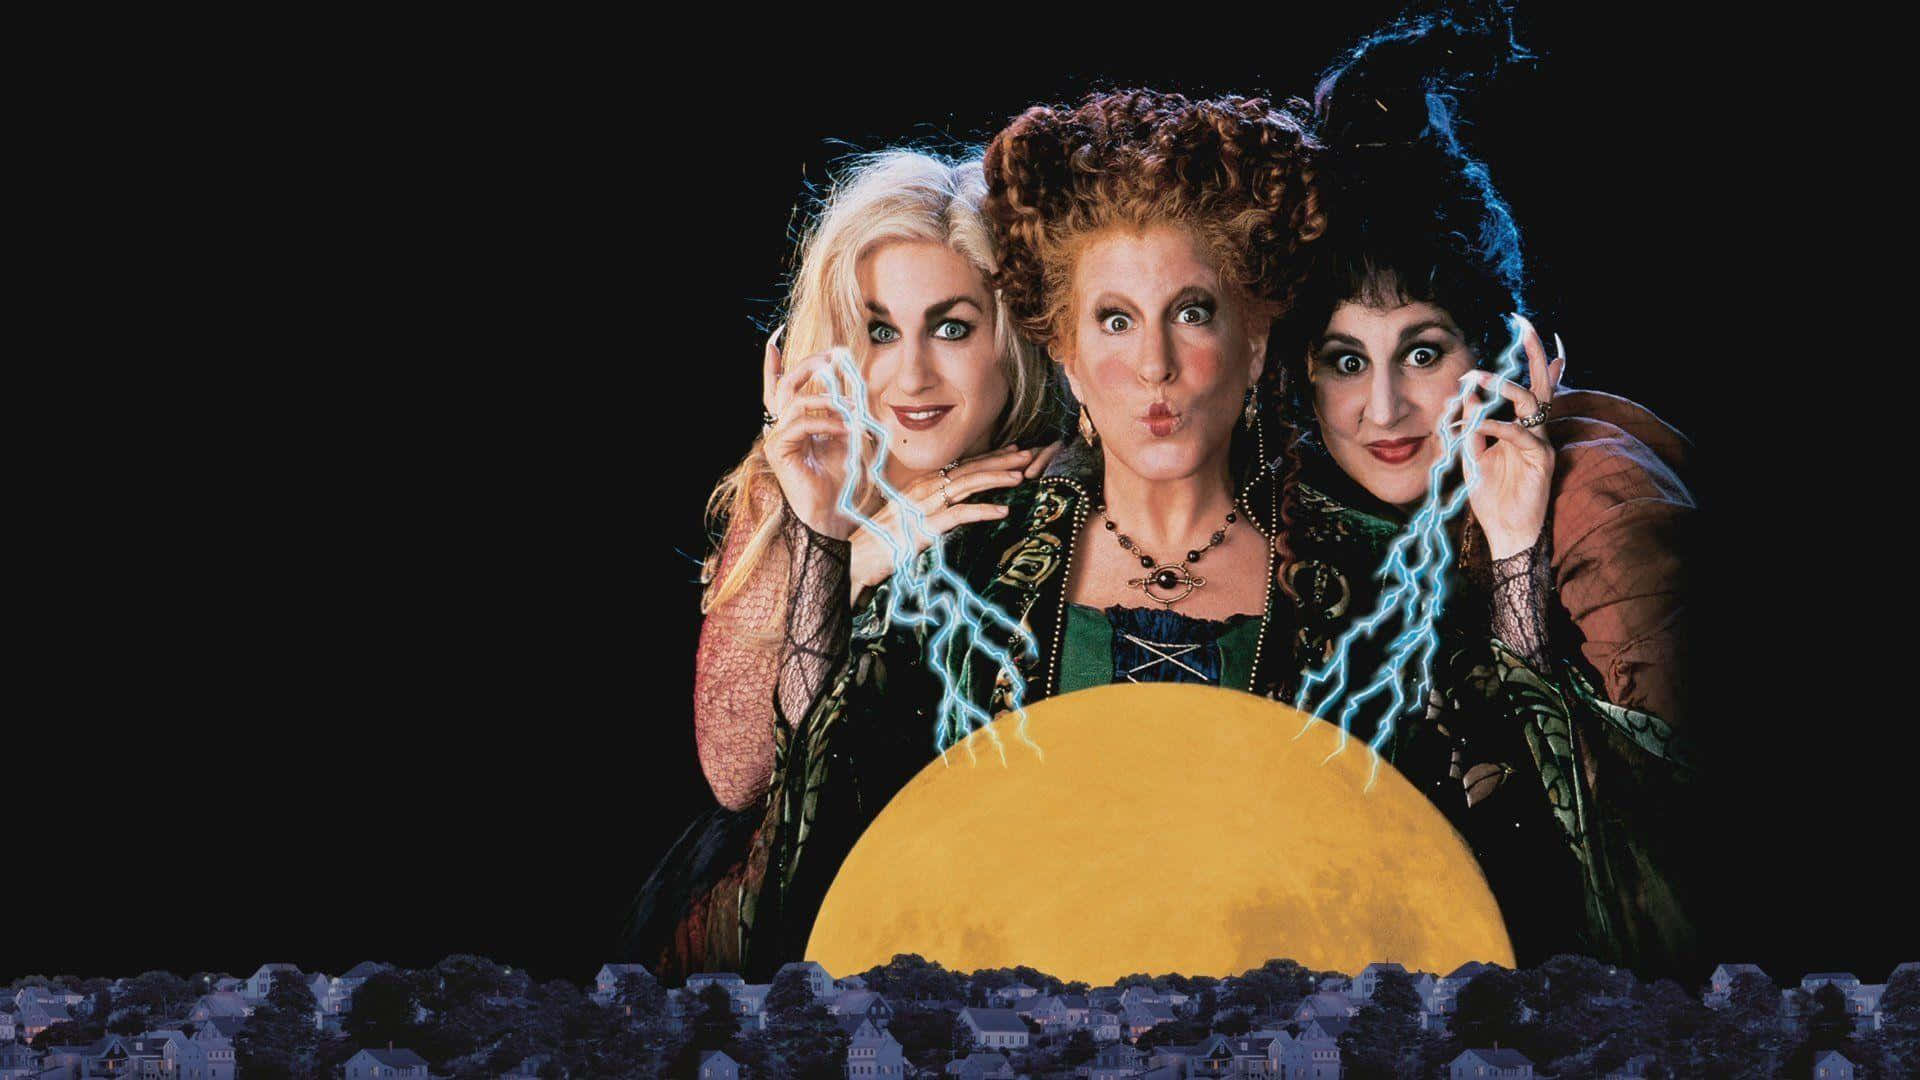 Prepare for a magical Halloween with Hocus Pocus